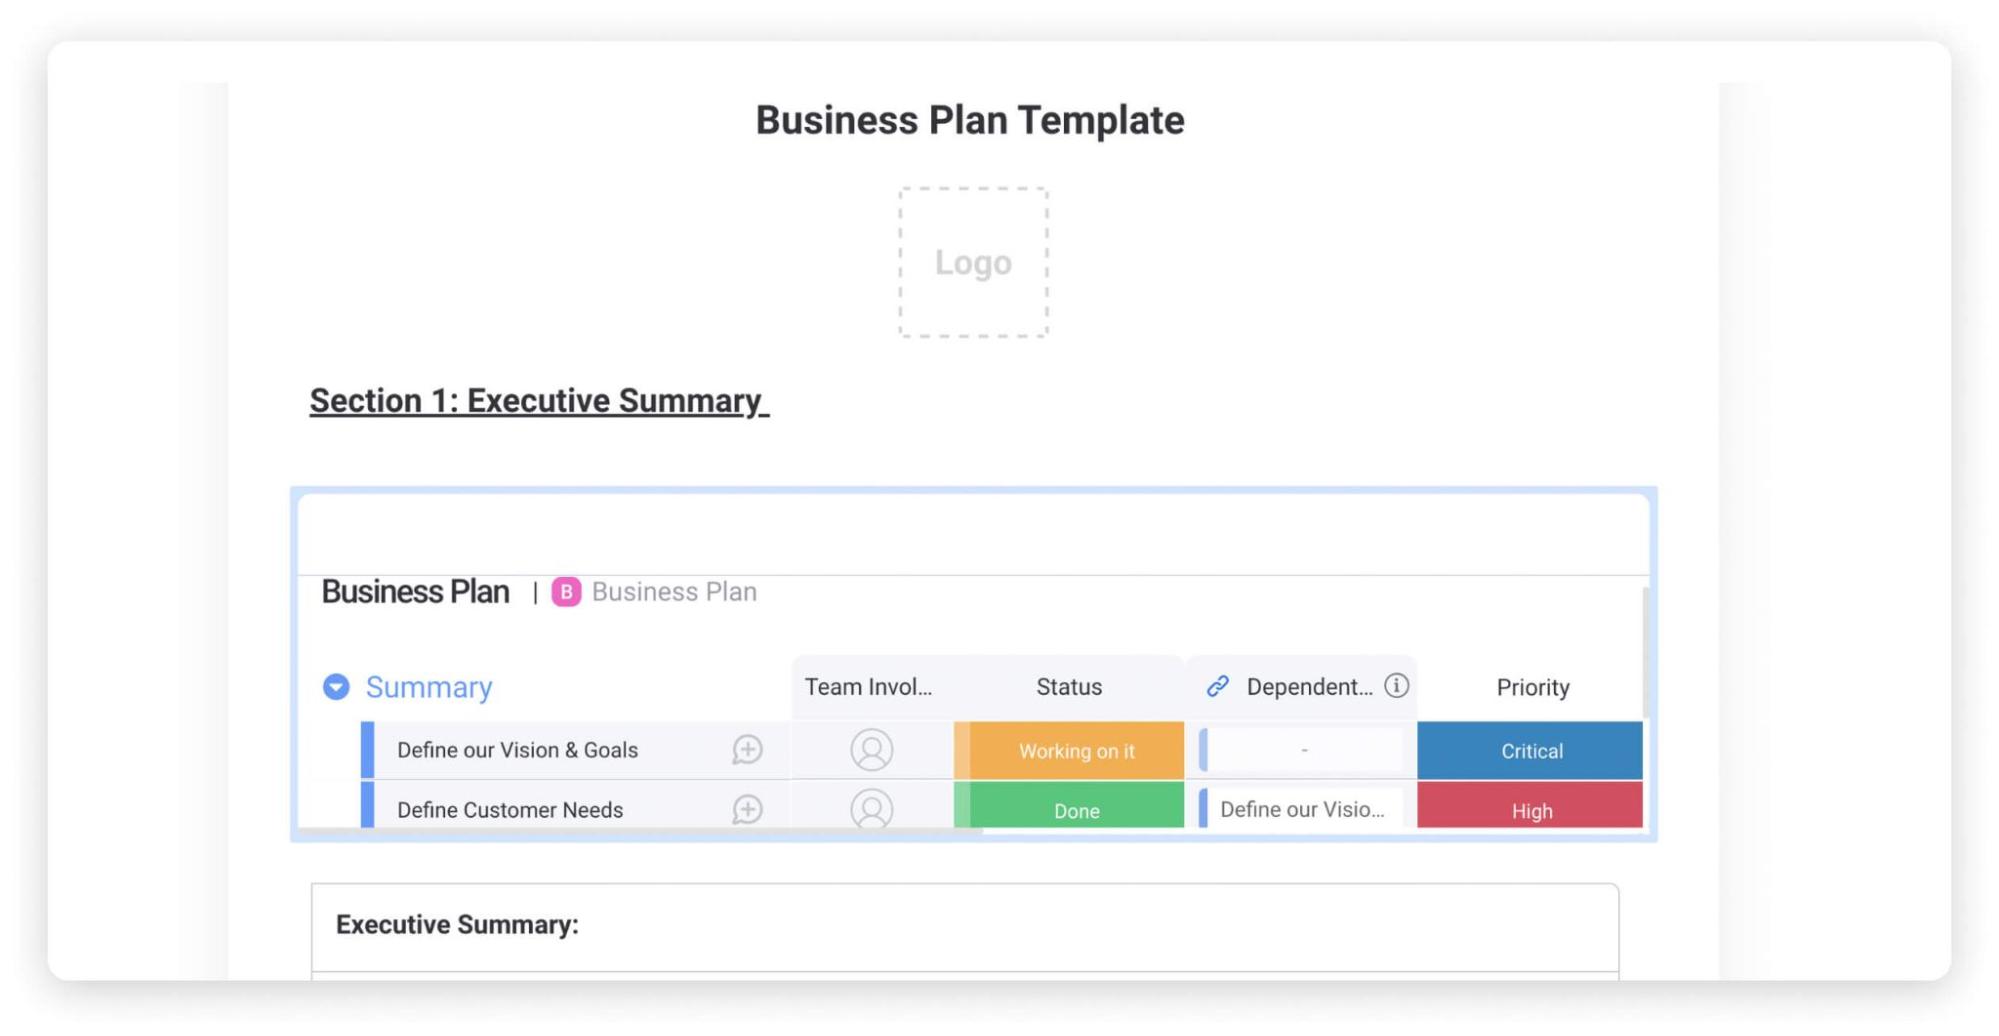 A screenshot of a simple business plan template from monday.com